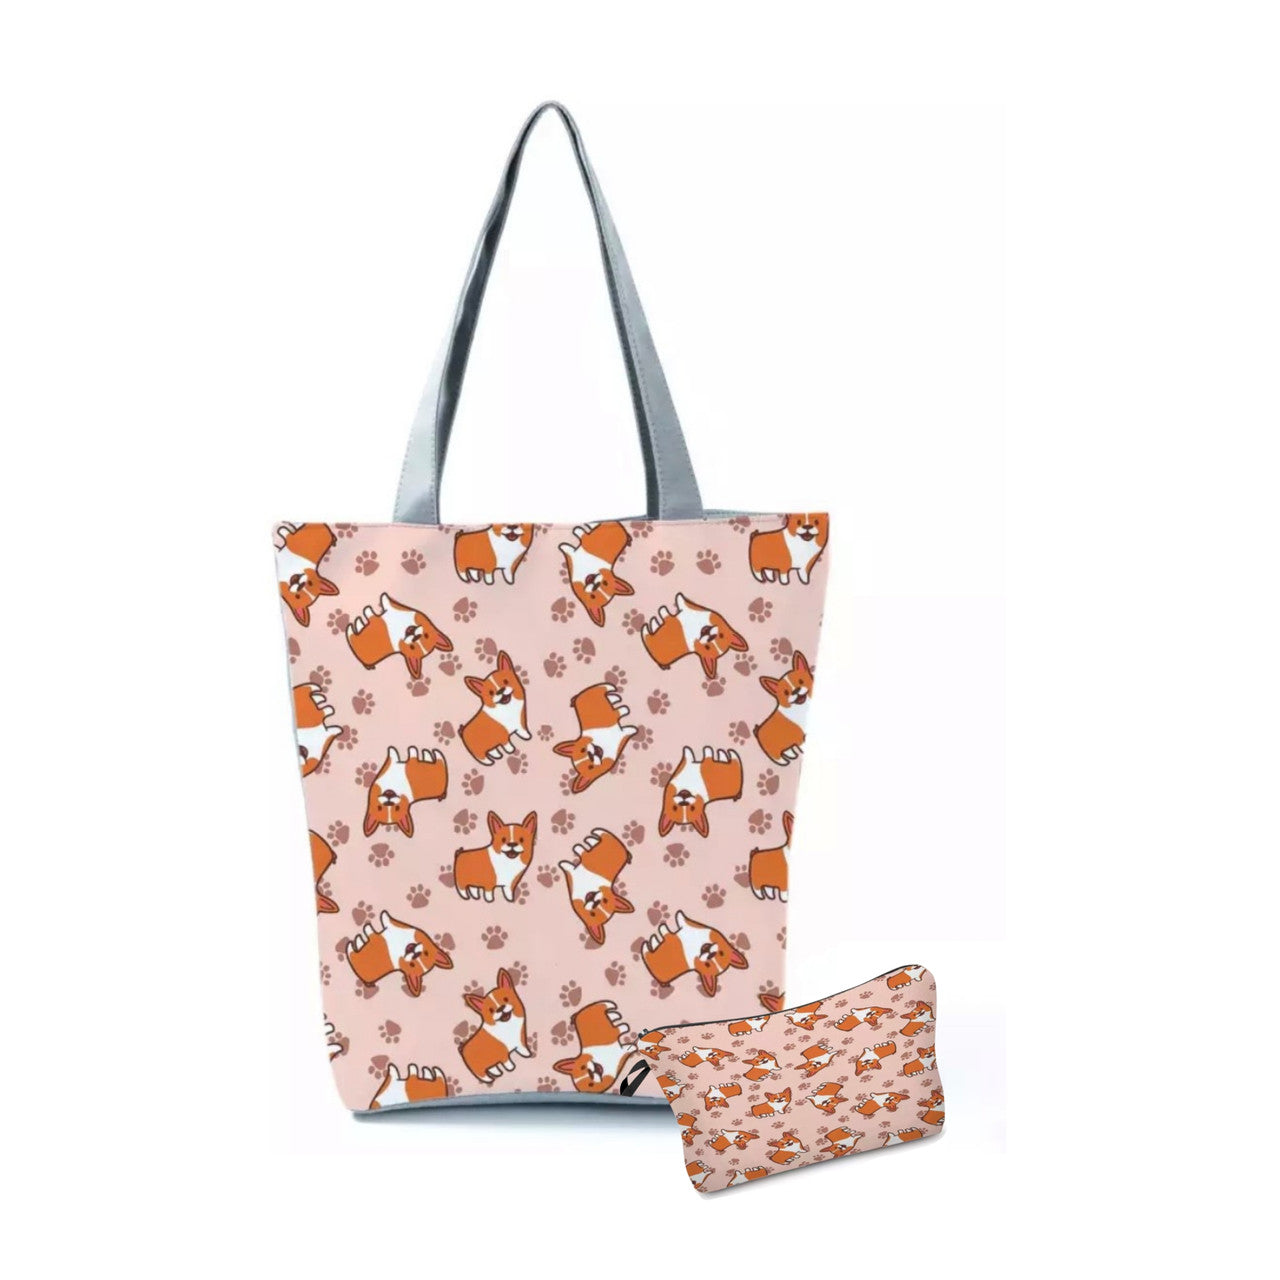 Doggy Bag sets including Free small zip up case